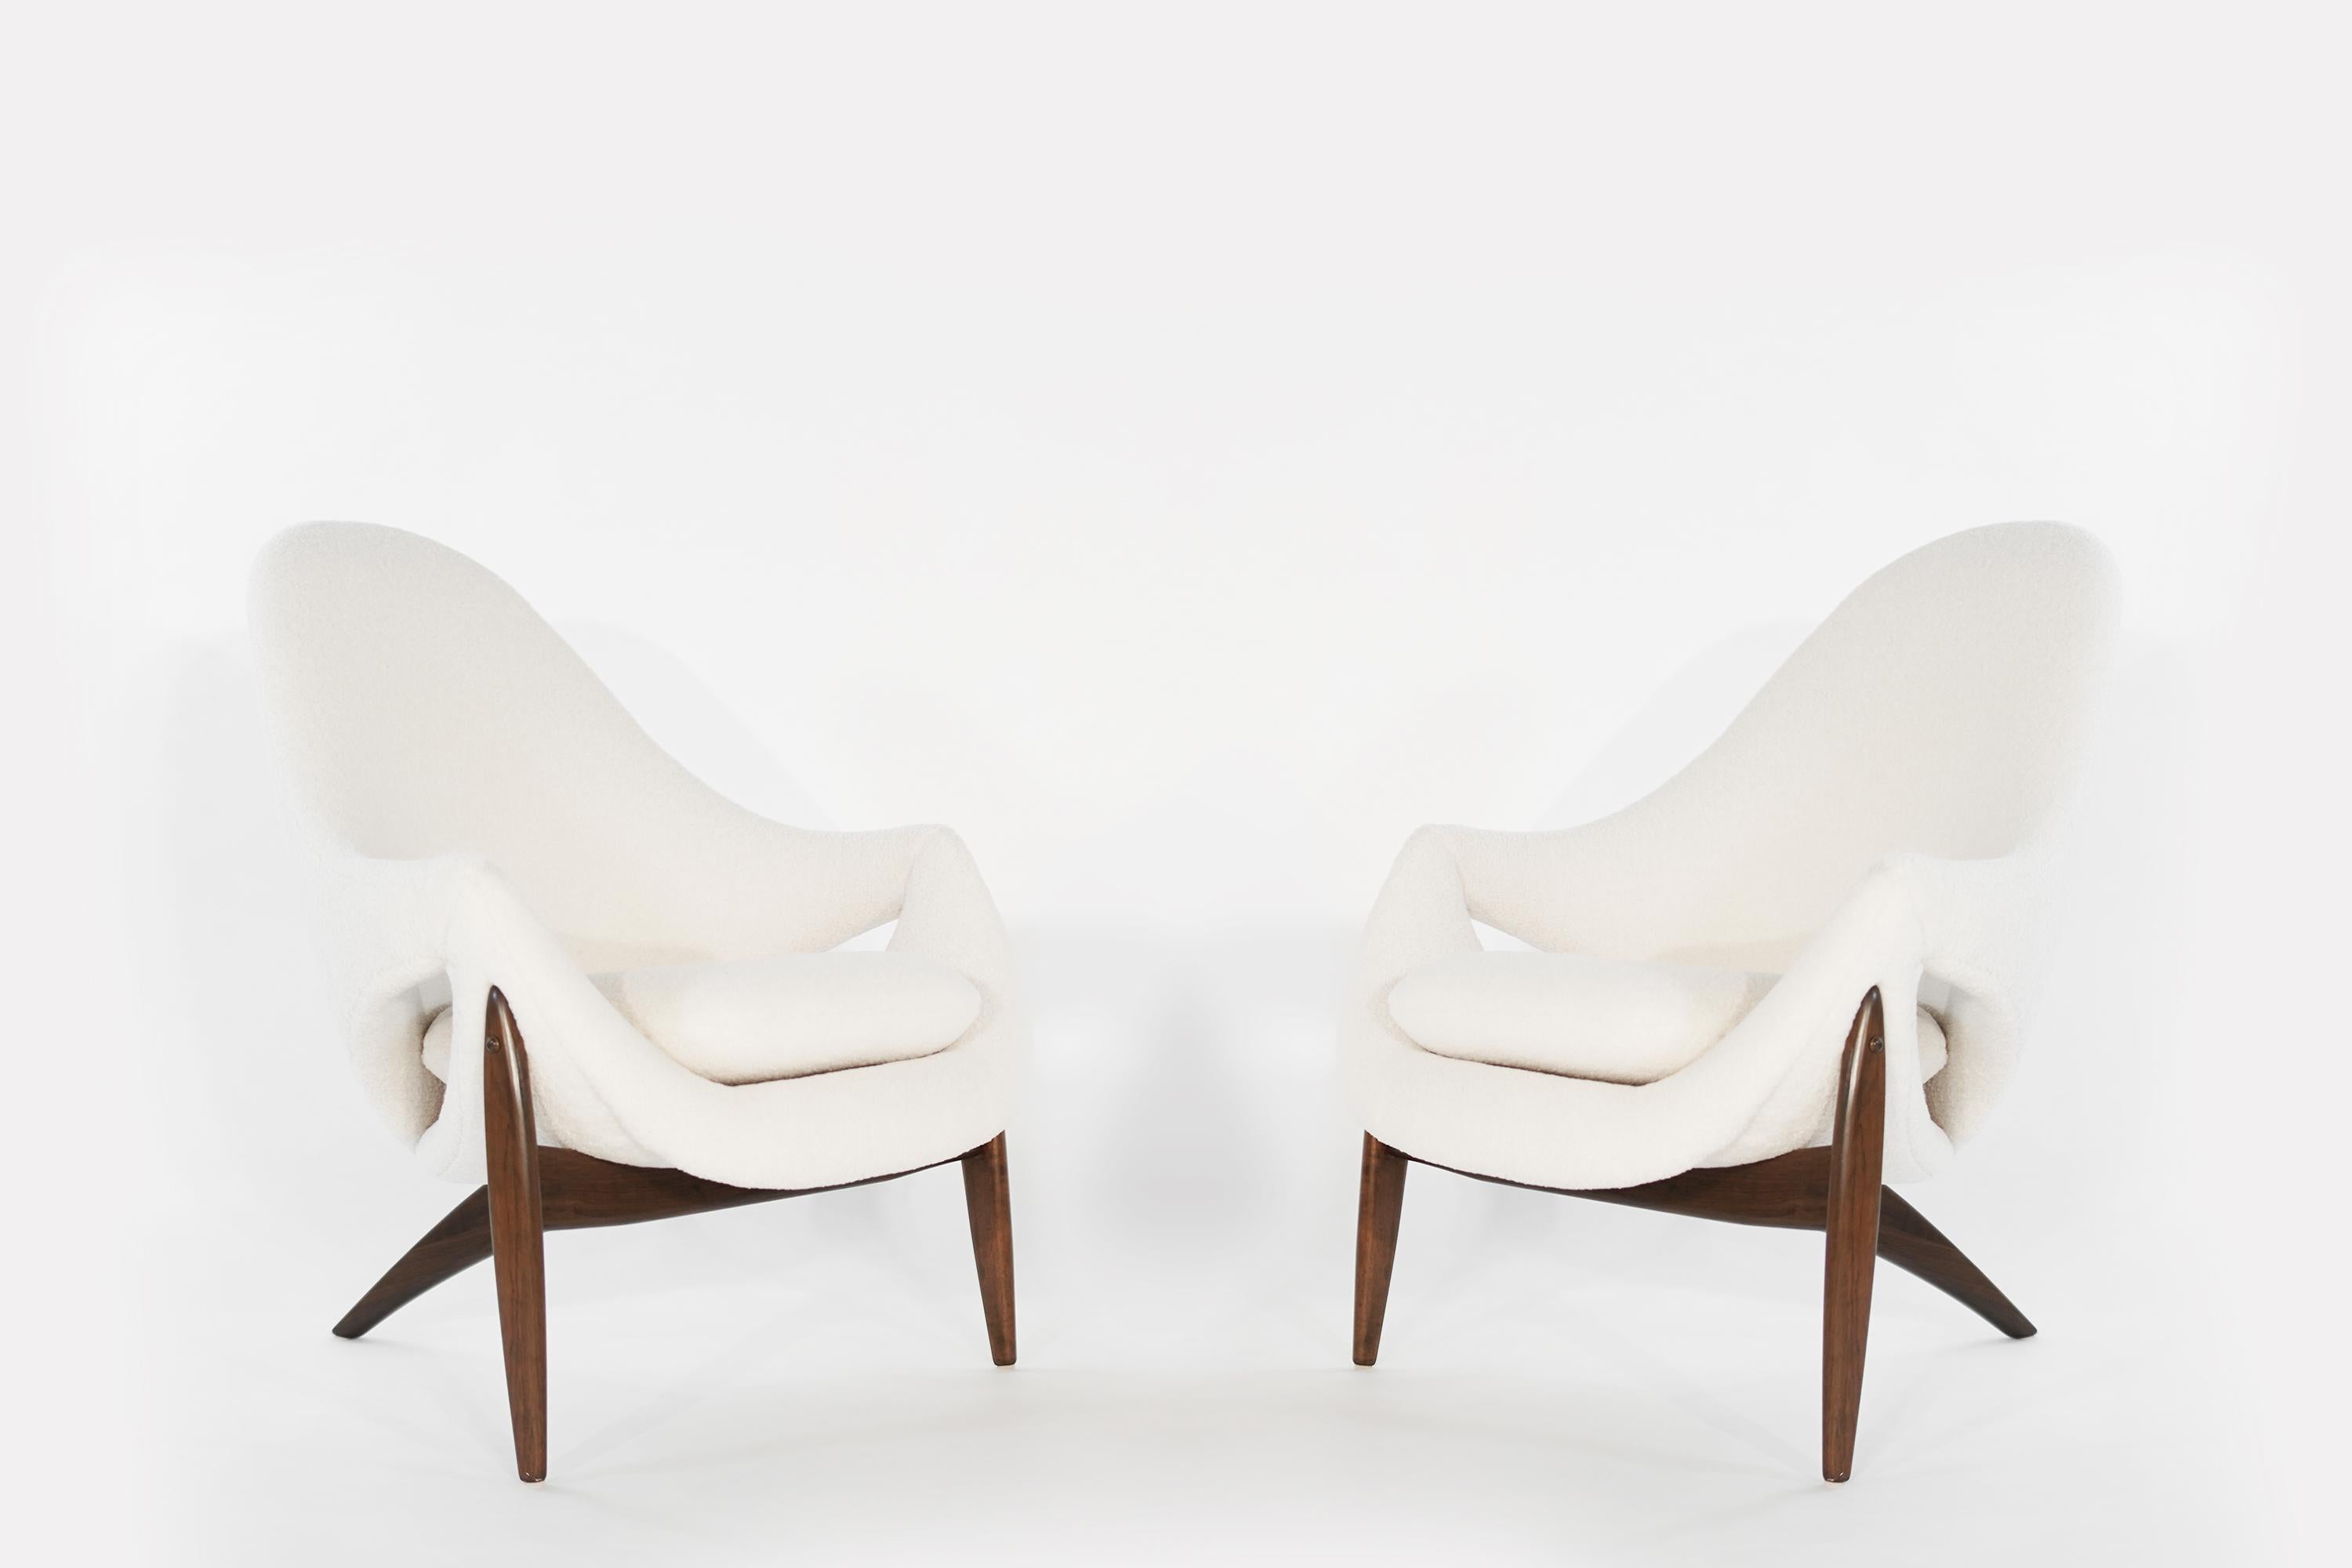 Rare seating suite designed by Italy-born furniture designer Luigi Tiengo and produced by the Canadian manufacturer Cimon in Montréal, circa 1963. Fully restored sculptural frames executed in walnut, newly upholstered in heavy wool by Kravet.